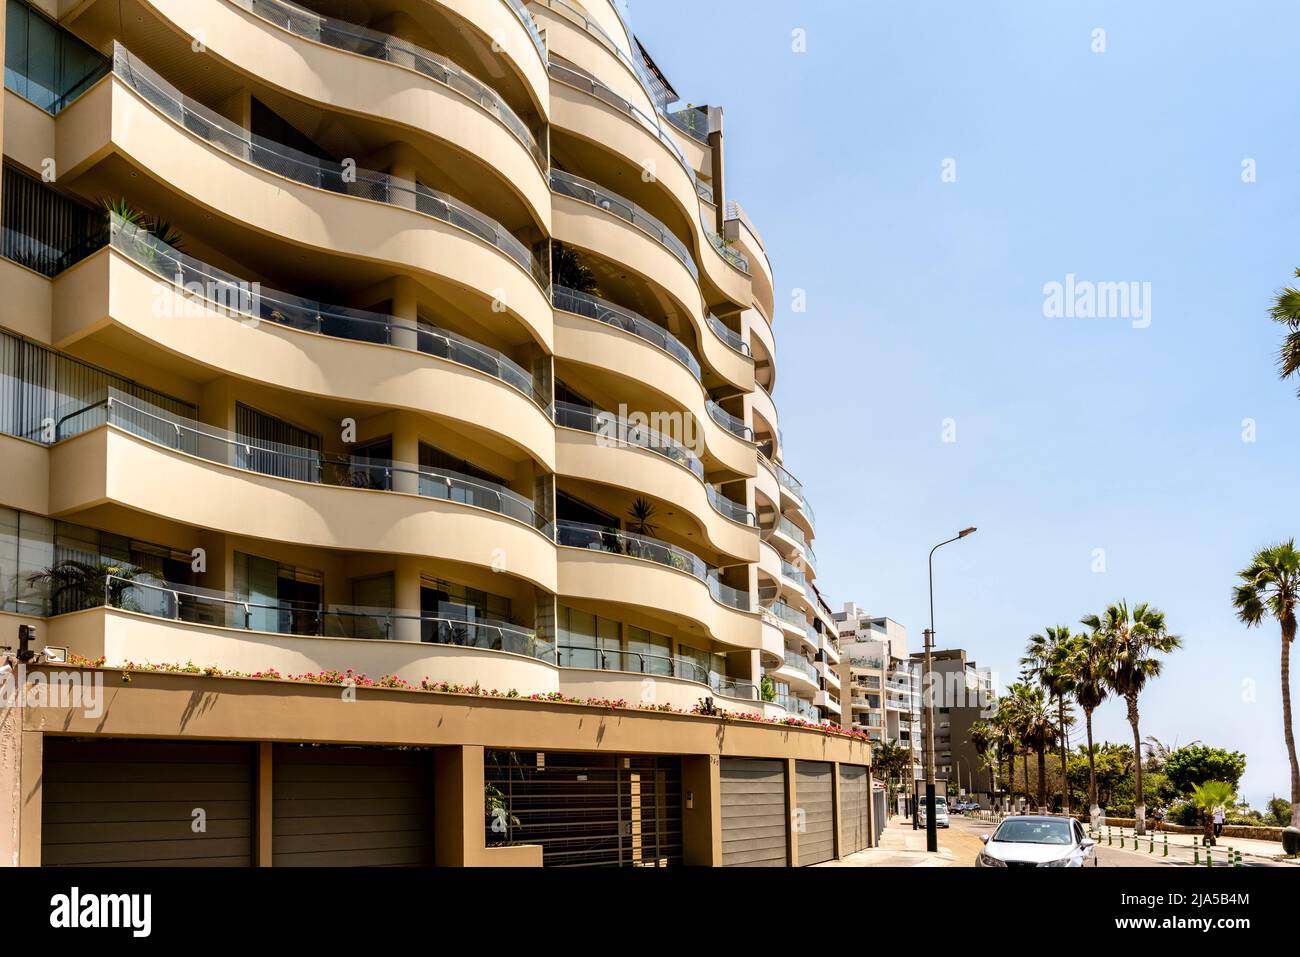 Ocean Facing Apartments In The Miraflores District Of Lima, Peru. Stock Photo